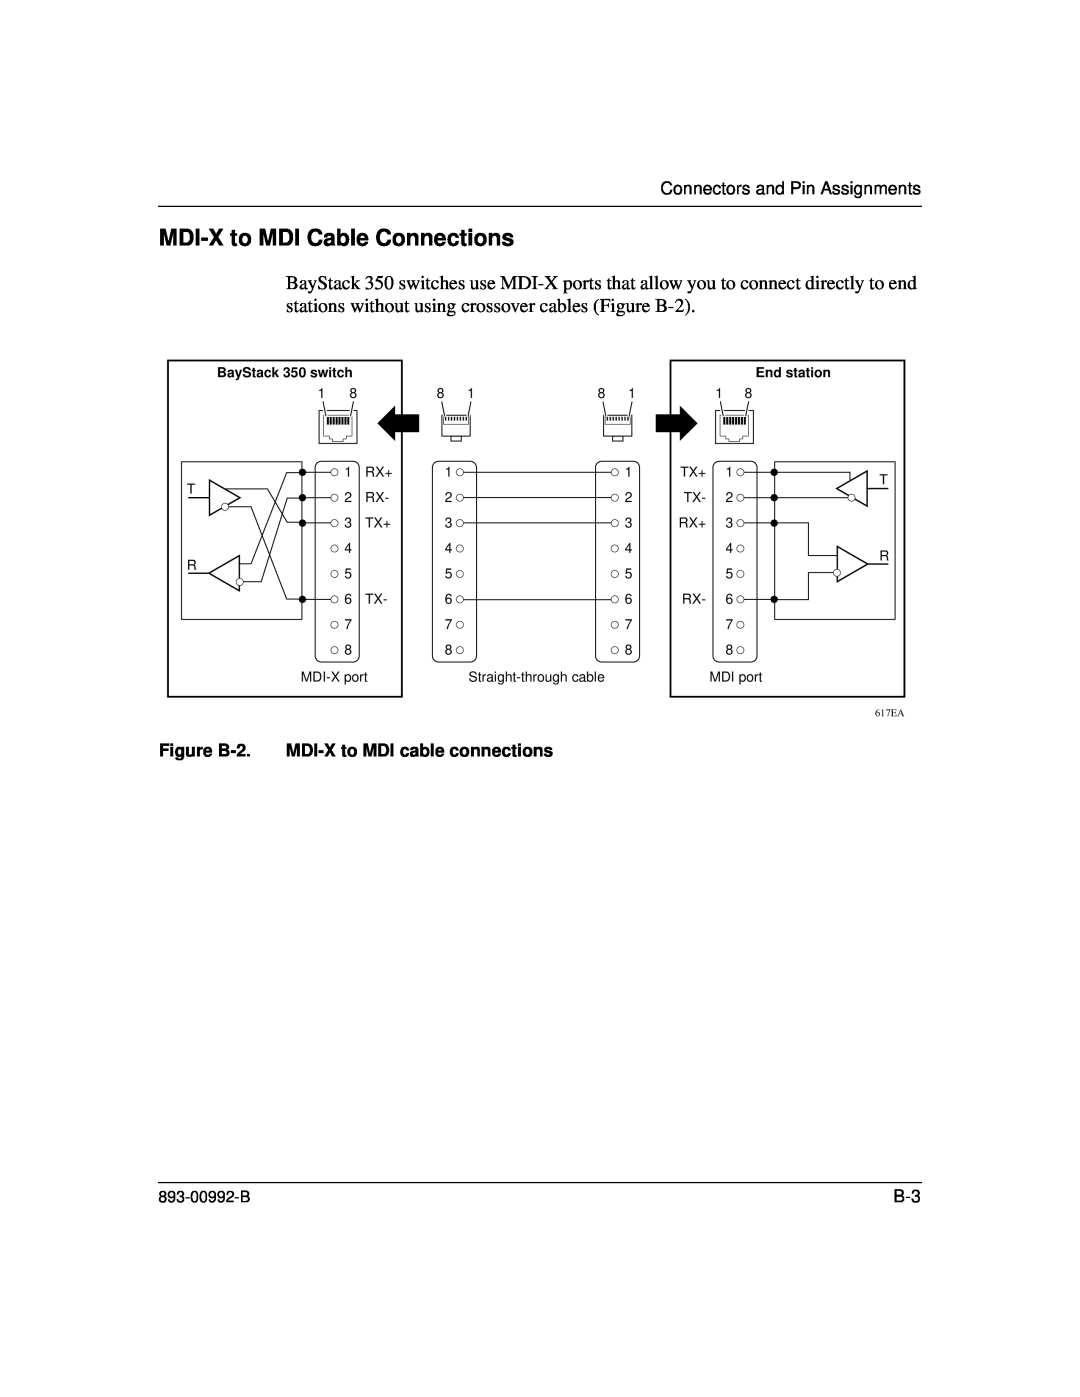 Bay Technical Associates manual MDI-X to MDI Cable Connections, Connectors and Pin Assignments, BayStack 350 switch 